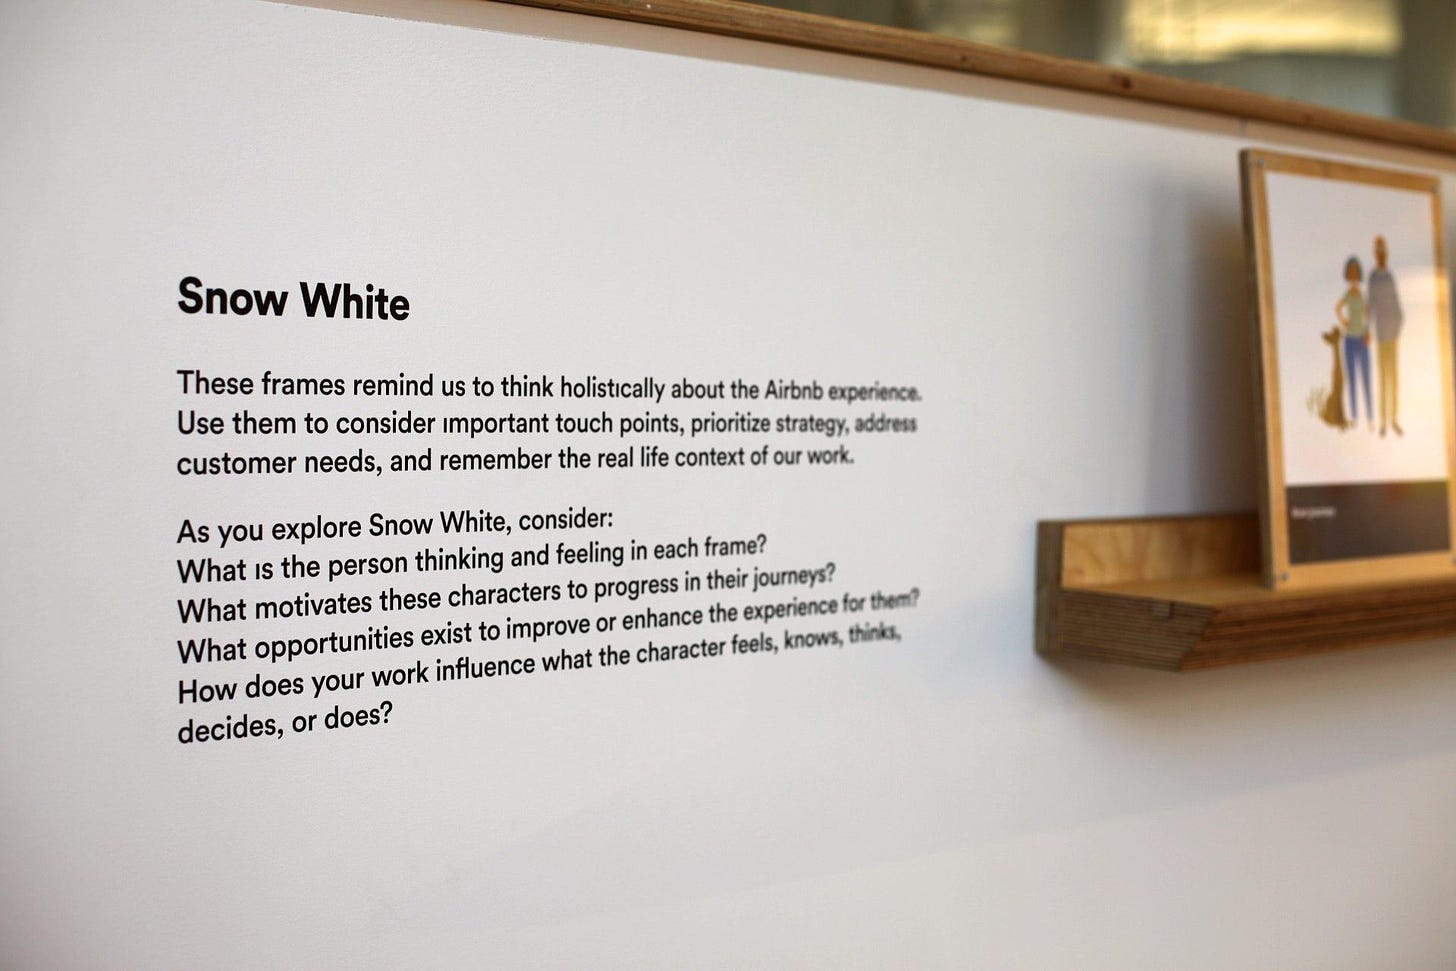 Snow White storyboard at Airbnb HQ